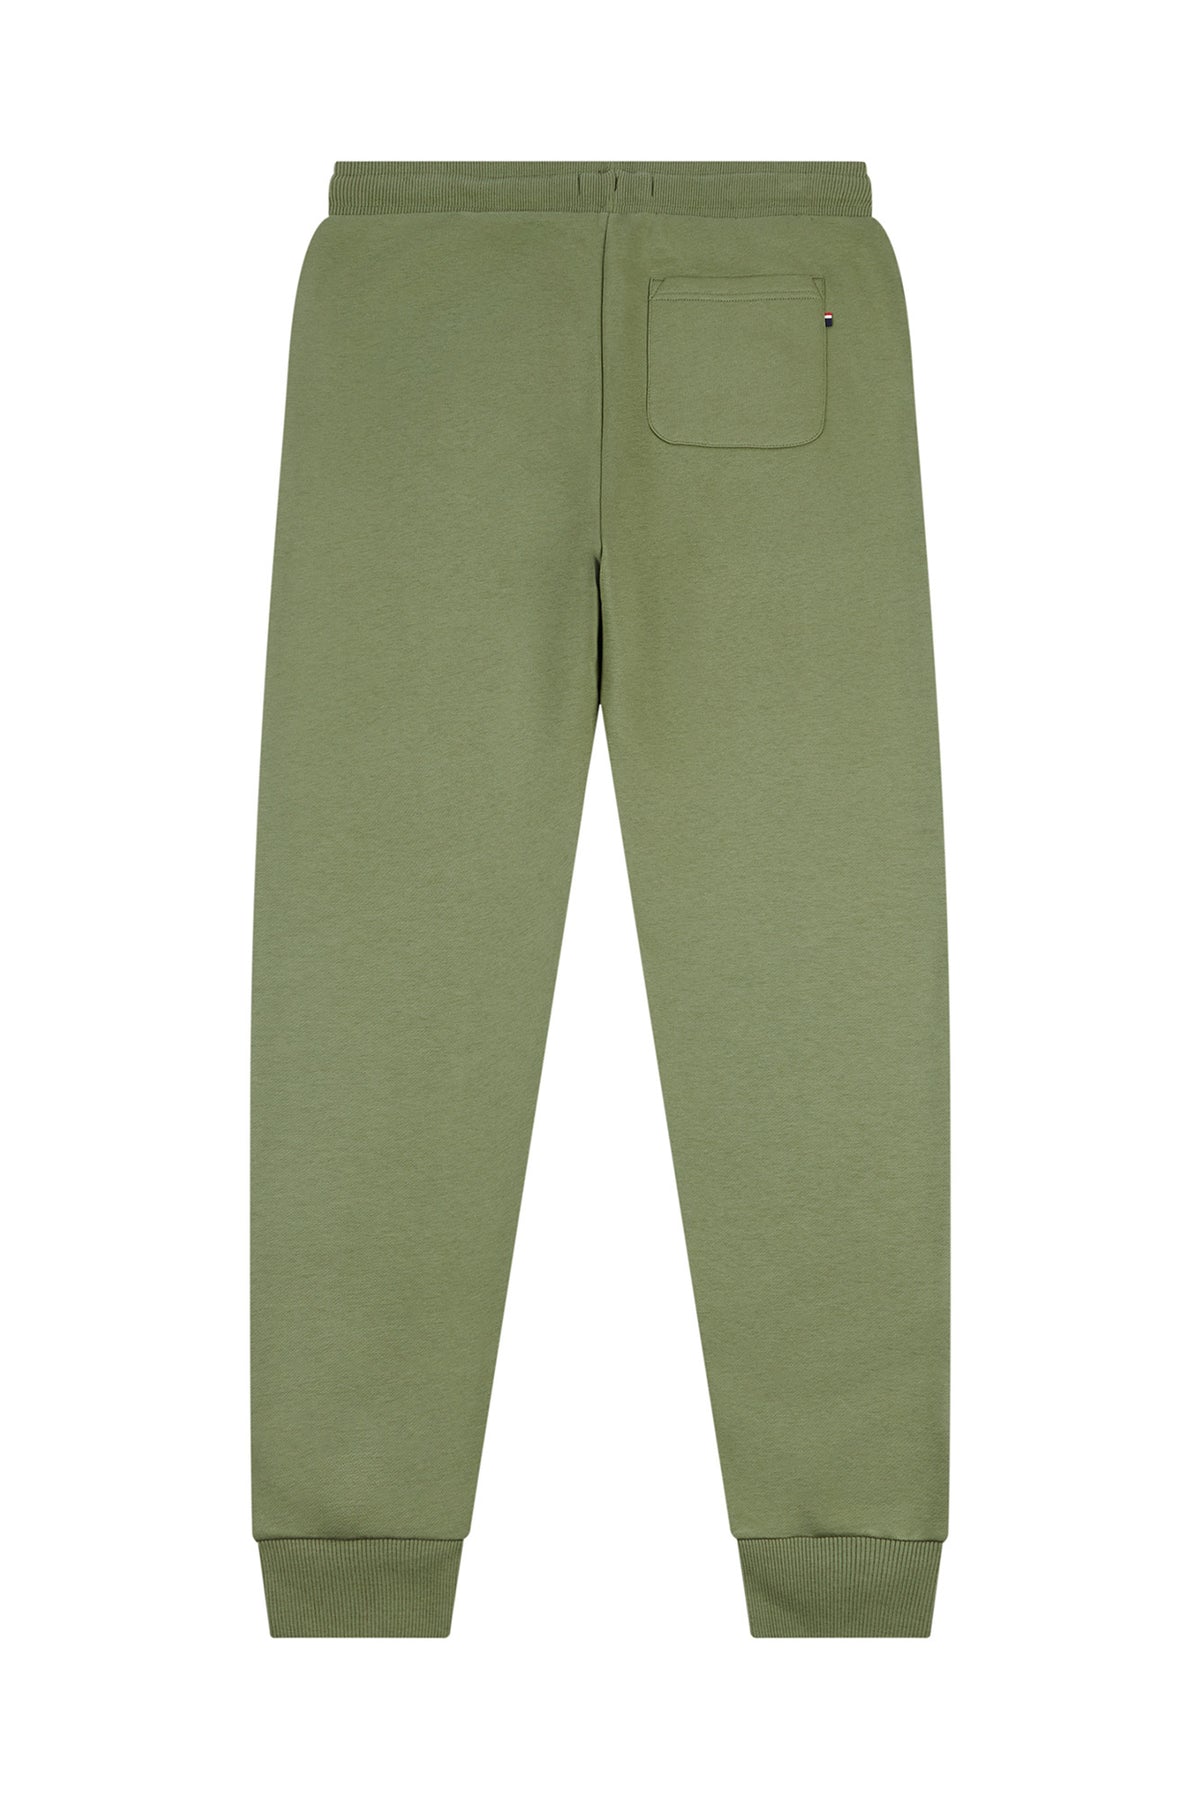 Mens Player 3 Joggers in Deep Lichen Green